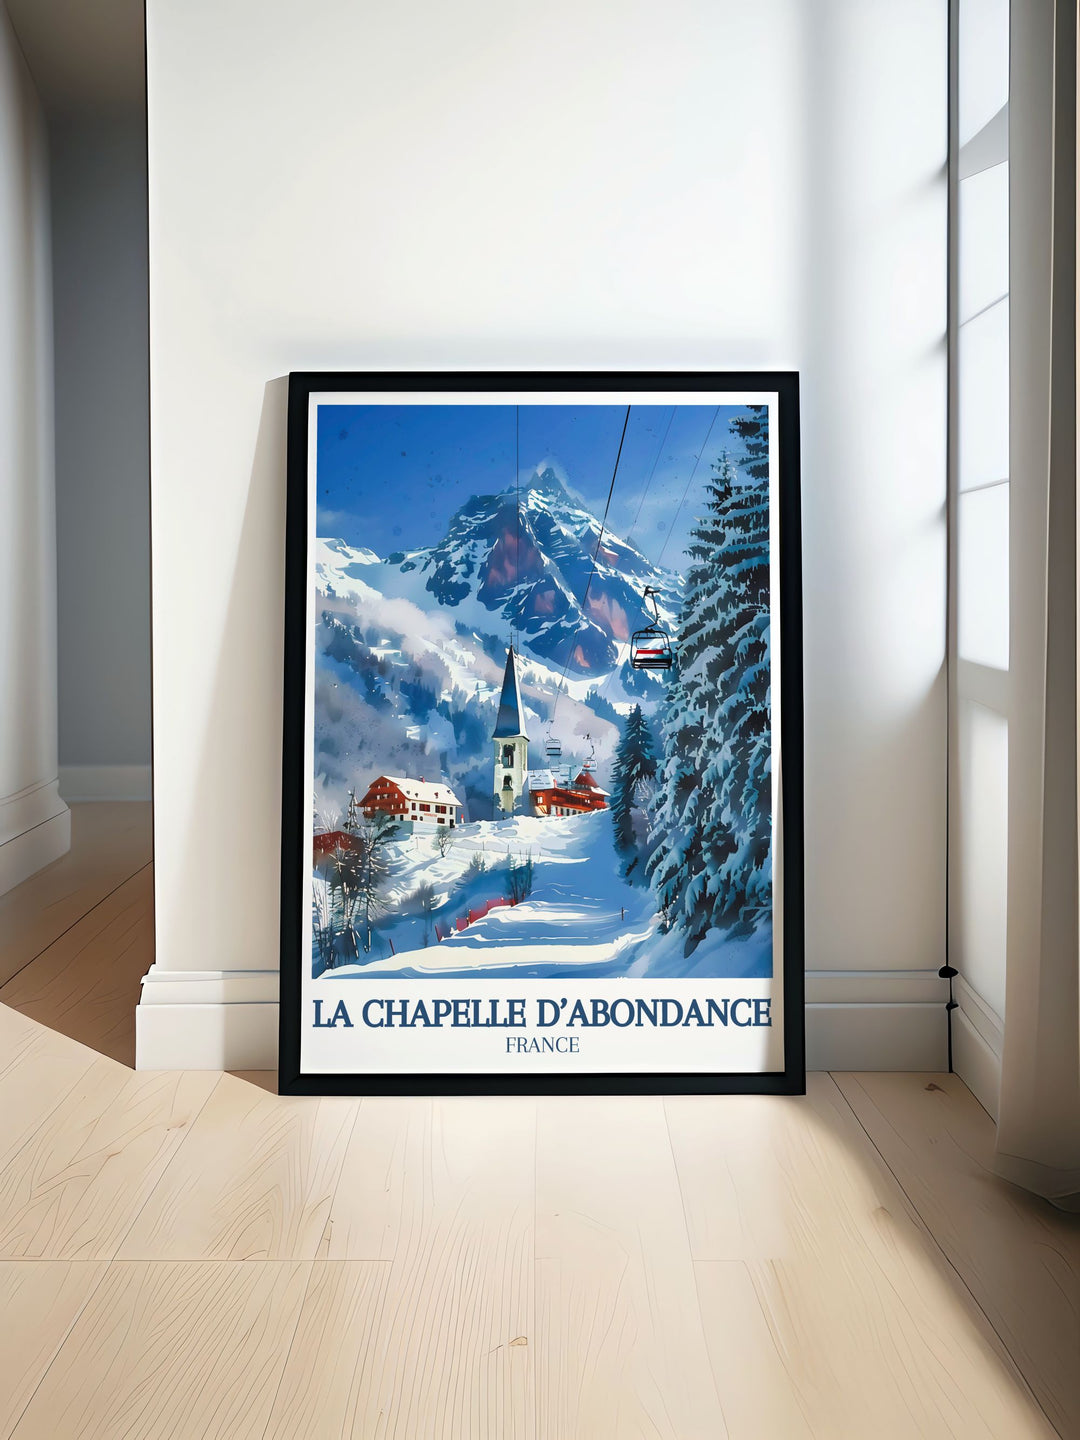 Stunning Ski Resort Poster featuring the enchanting landscapes of Saint Maurice and Val d Abondance perfect for bringing the beauty of the French Alps into your home this vintage ski print is a must have for skiing enthusiasts